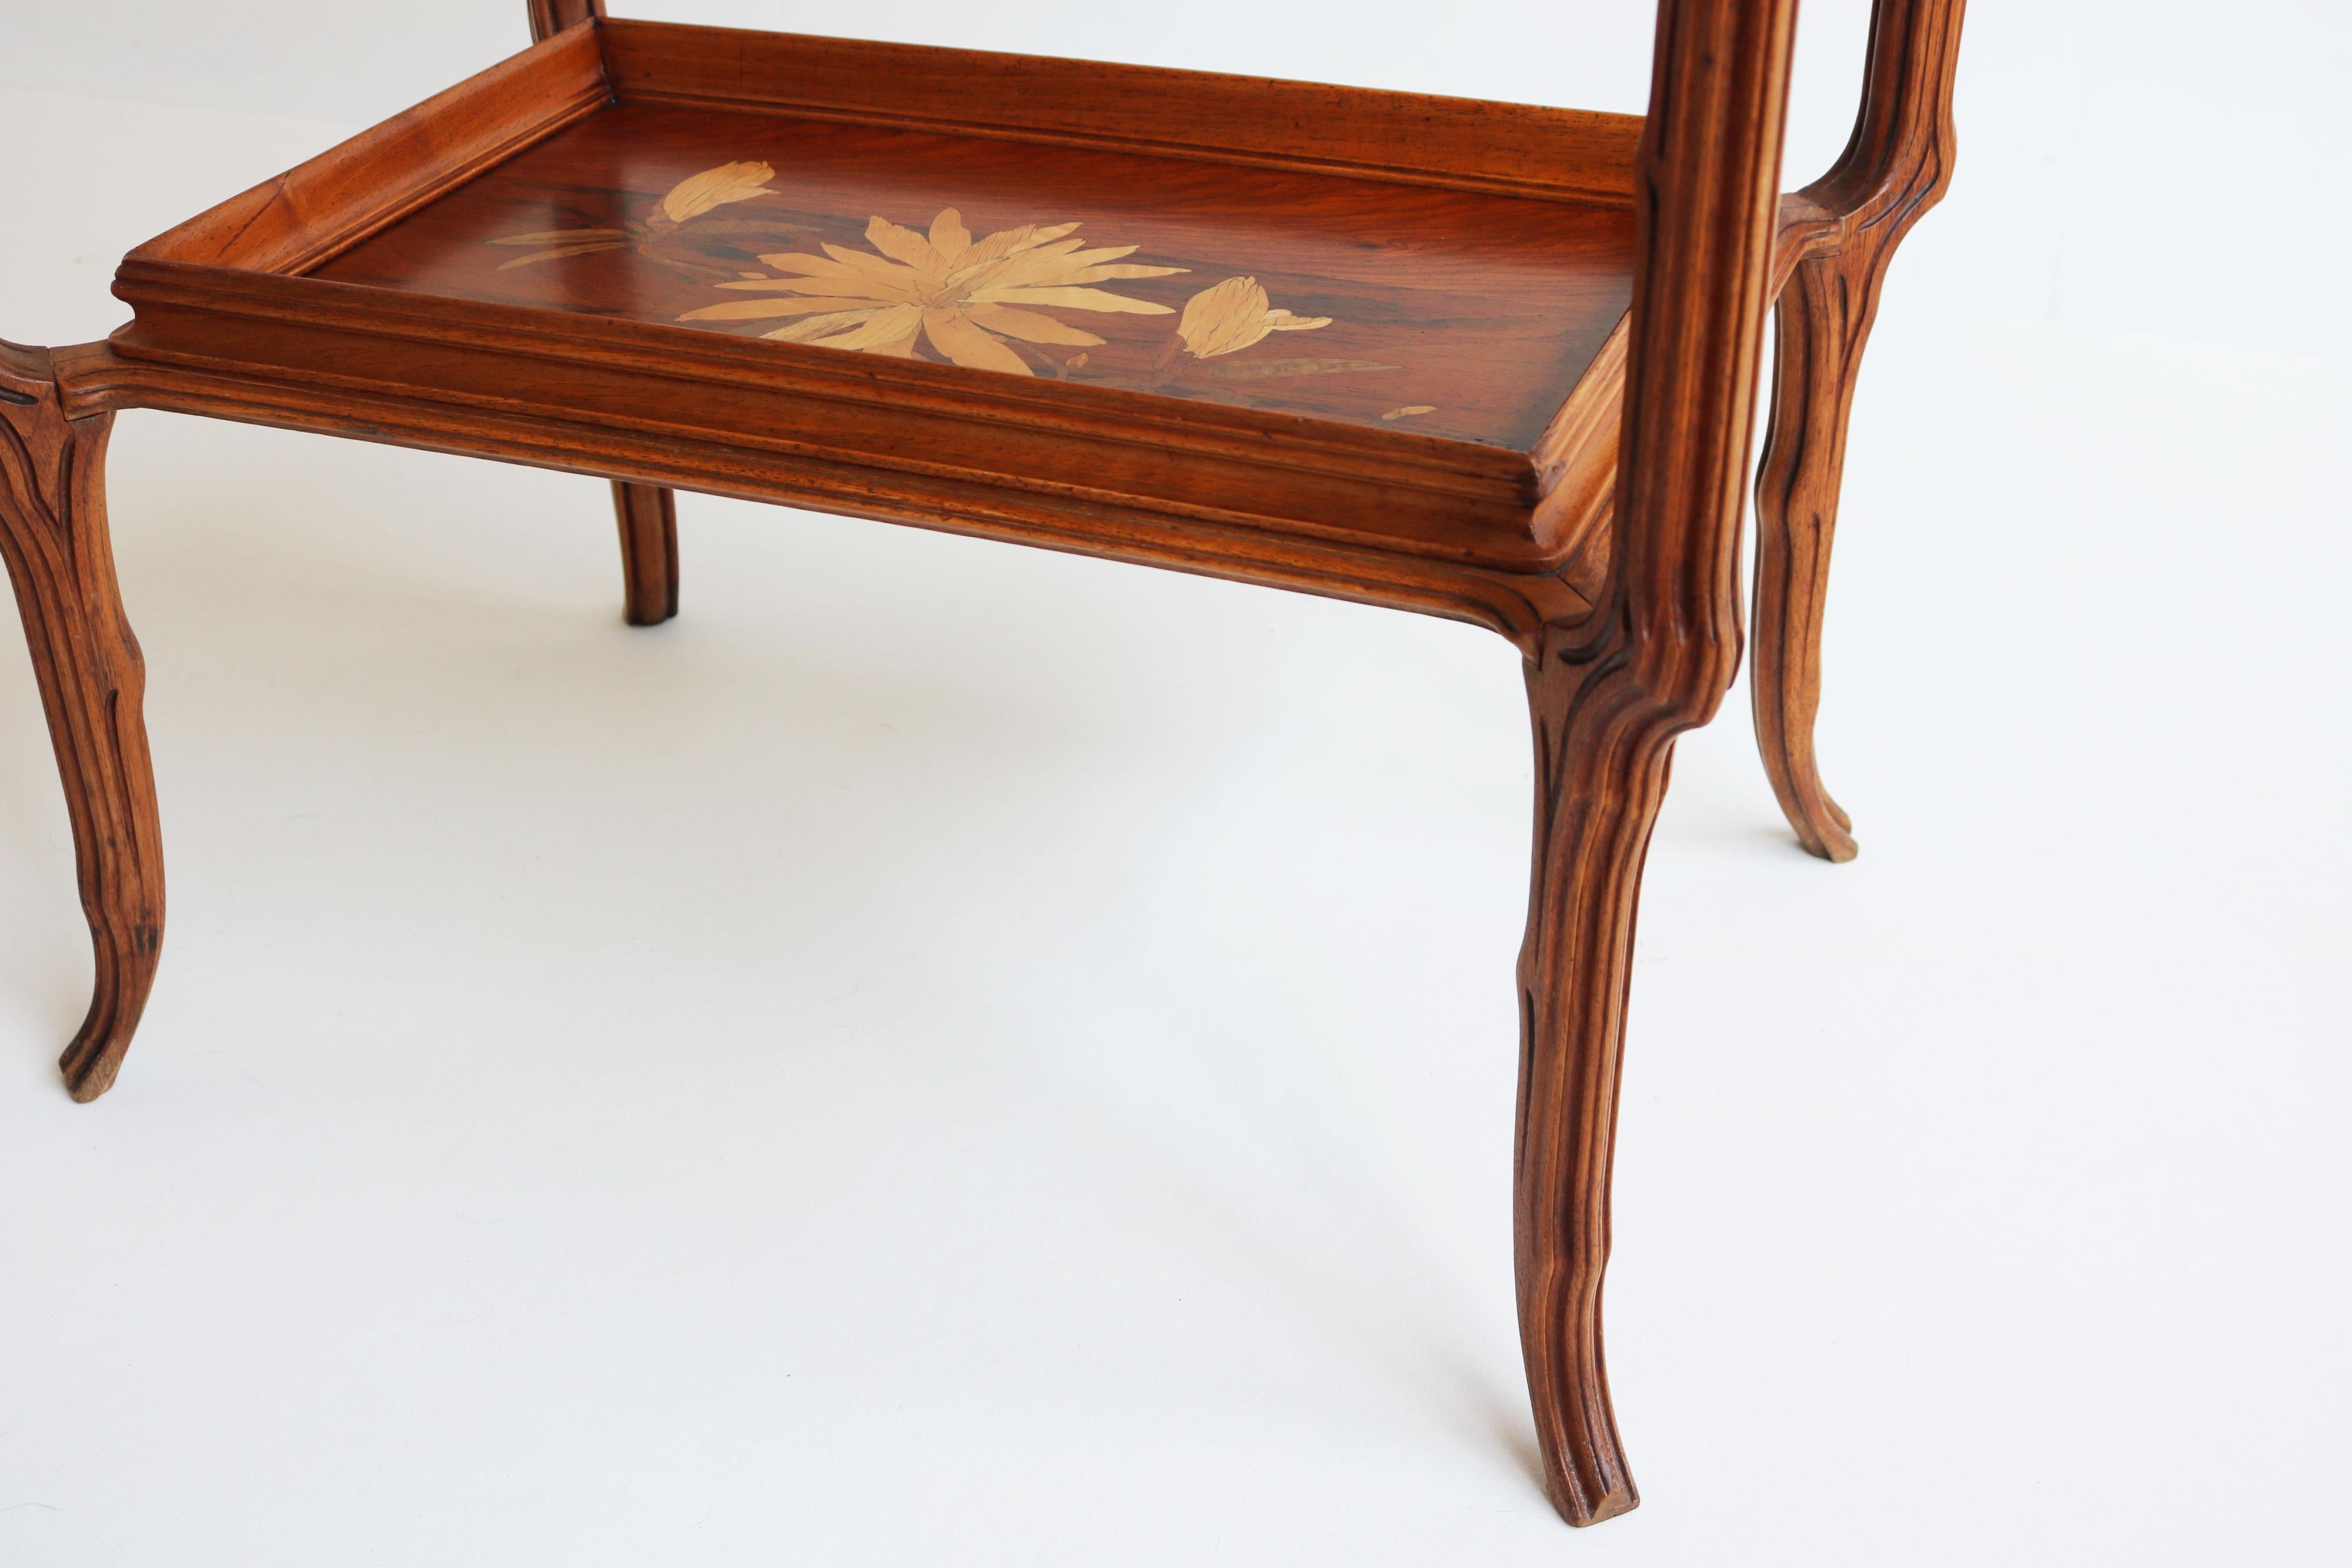 Original French Art Nouveau Marquetry Table ''Japonisme'' by Emile Galle 1900 For Sale 7